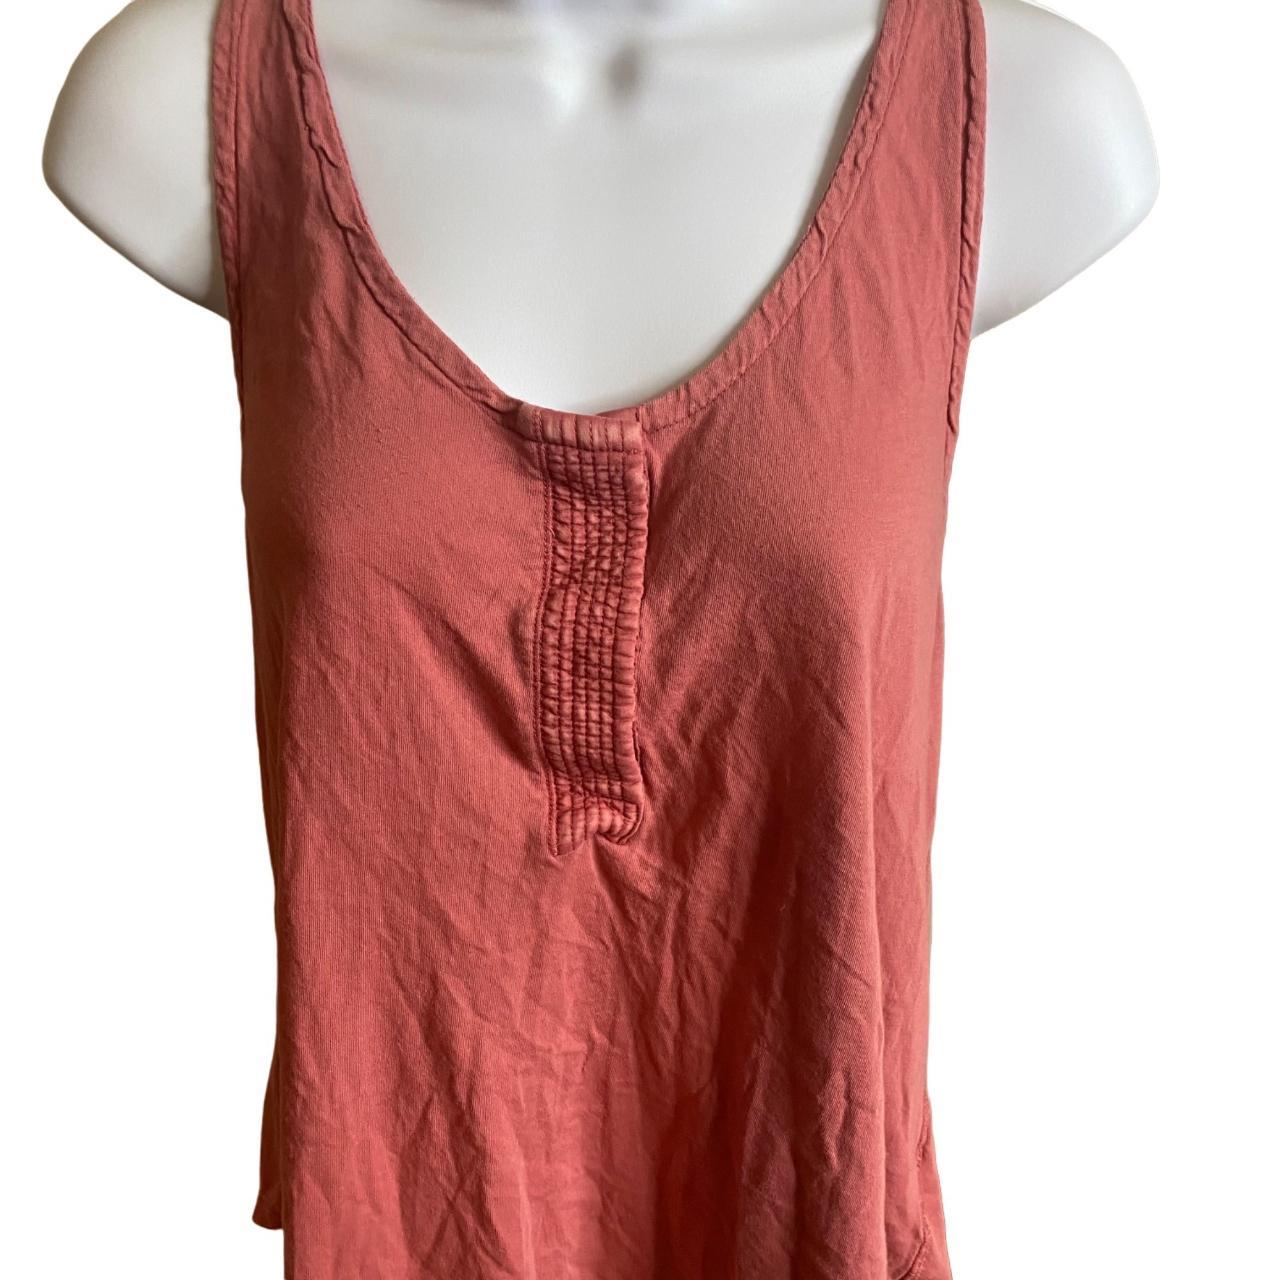 Product Image 3 - KENJI TANK

DISTRESSED RED

100% COTTON

SIZE L

HIGH